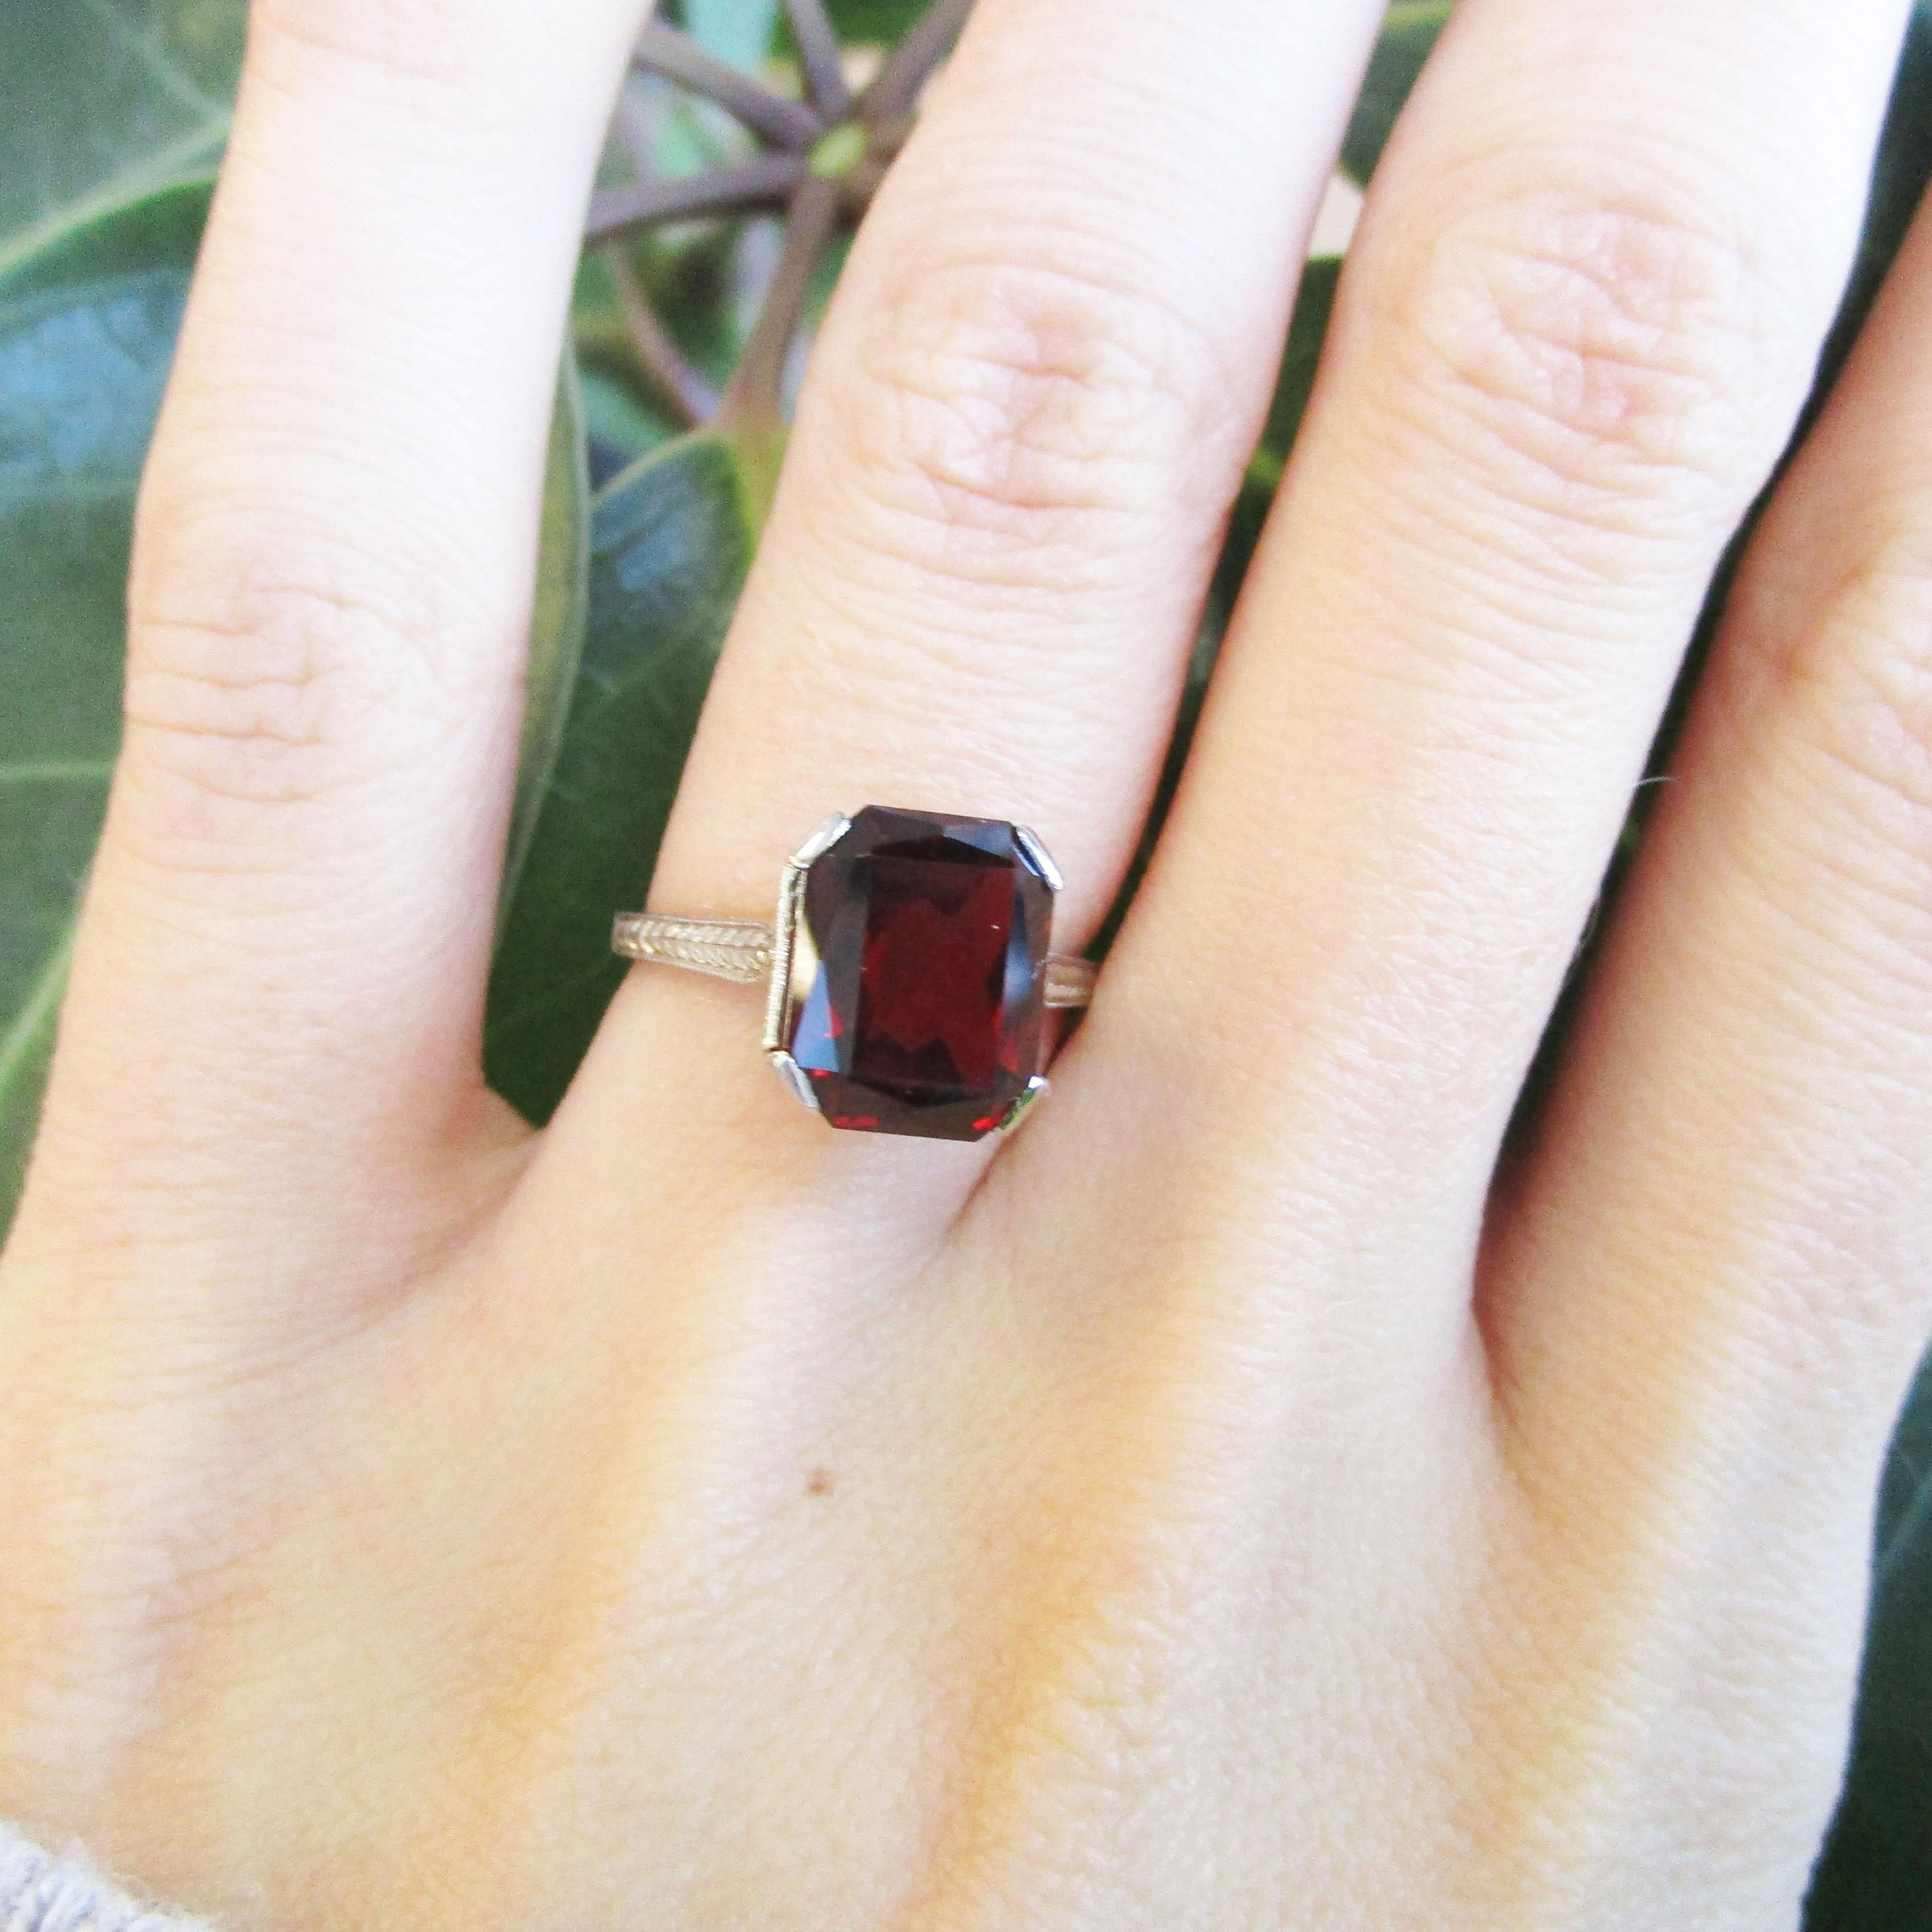 This is an absolutely arresting Art Deco ring from 1925 in 18k white gold with a truly breathtaking red garnet center stone. The delicate ring features finely engraved detailing on the shoulders and under-gallery that creates a subtle layer of